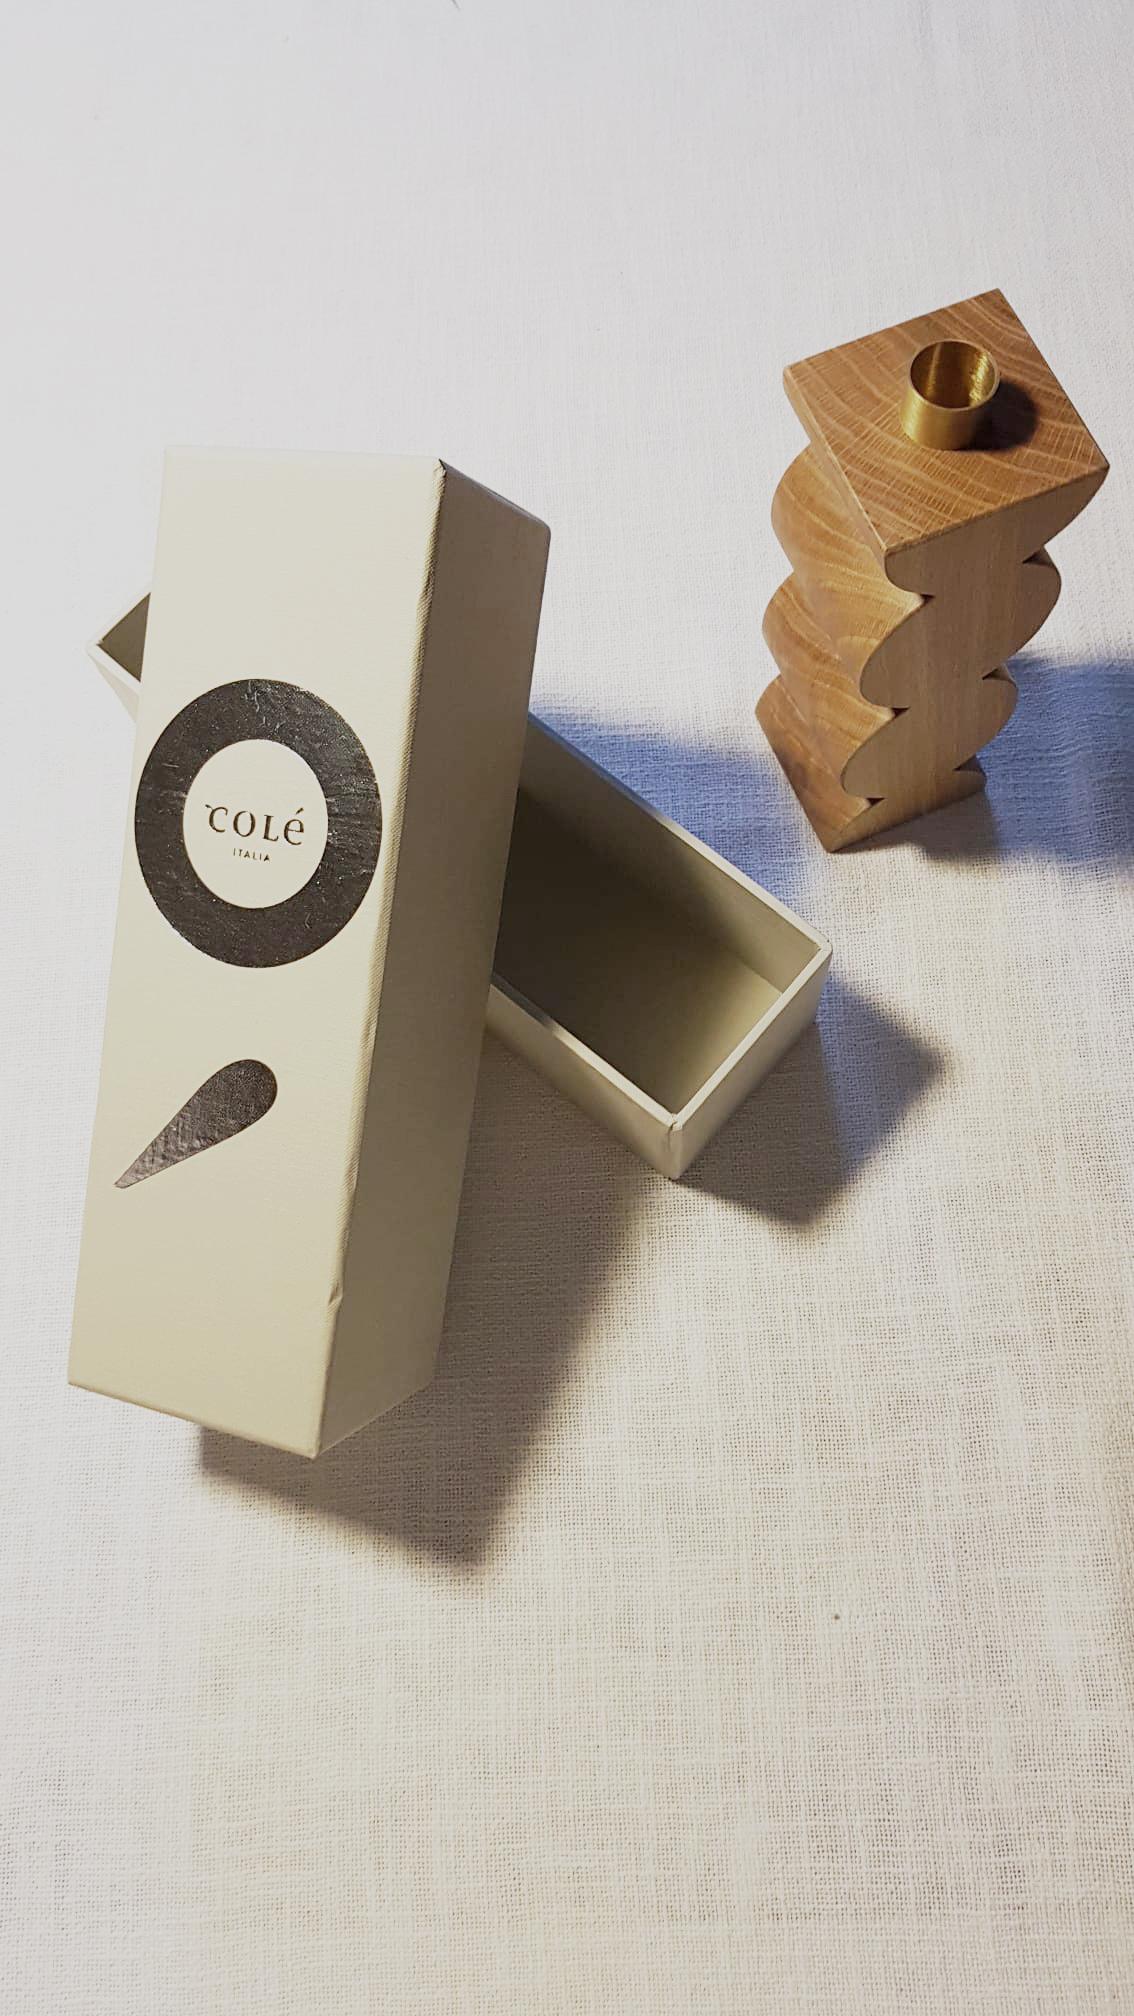 Constantin 1 is a simple but charming candleholder with a geometric shape with circles. The body is in solid oak wood. The cylinder in natural brass on the top is the place where to put a 18 mm candle.
In the same collection 3 different models of